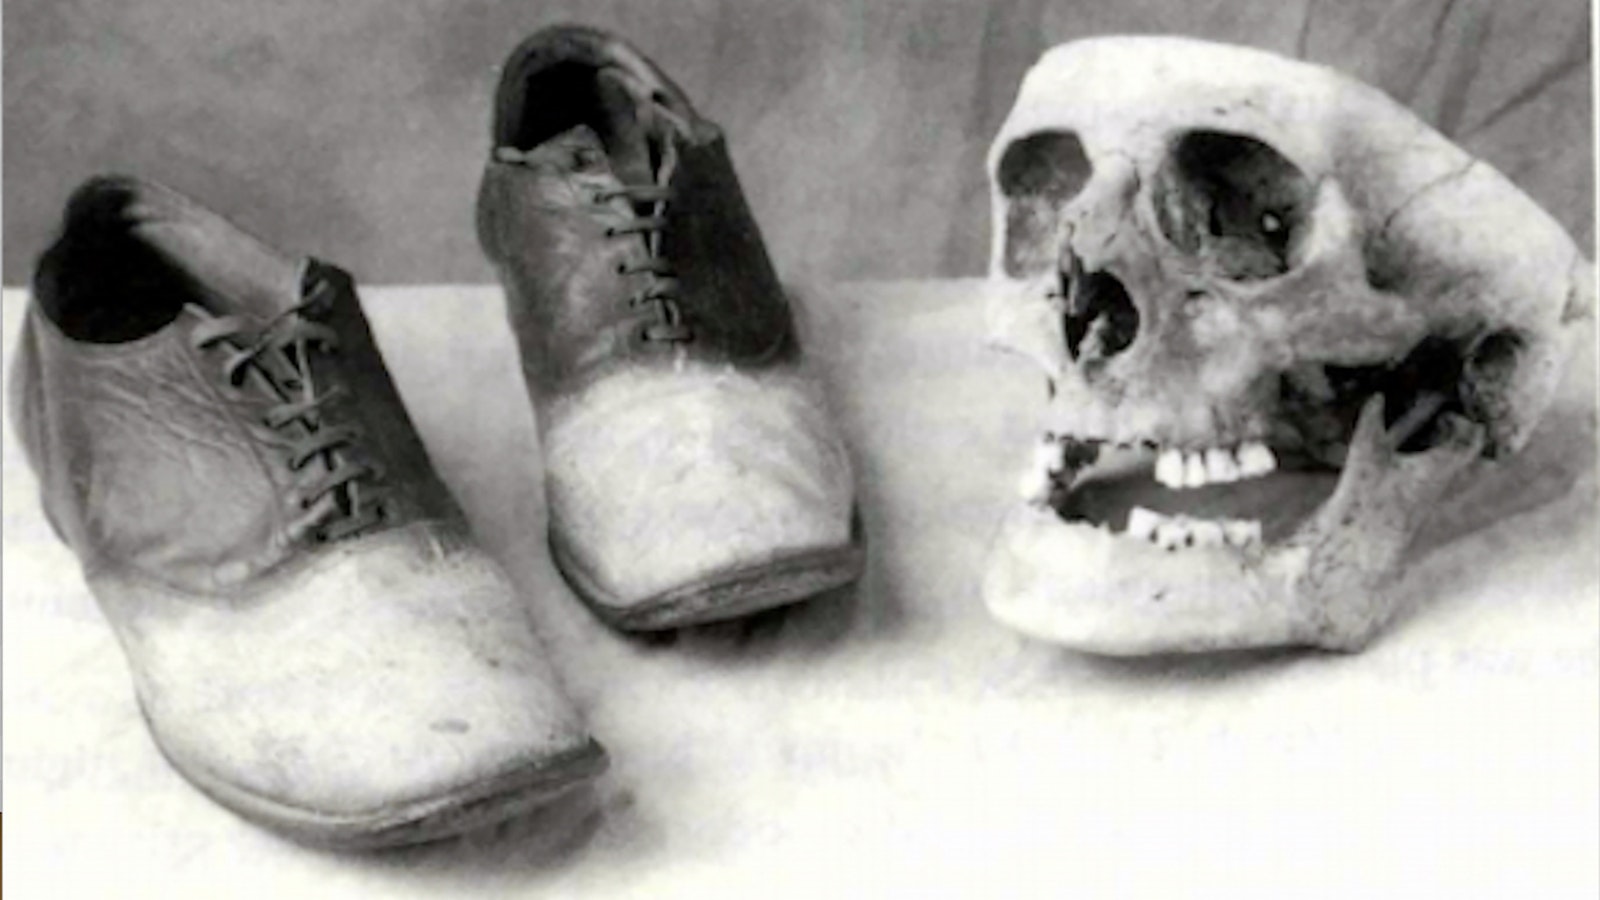 Wyoming outlaw George "Big Nose" Parrott would have his skin made into a pair of shoes for the eventual governor of the state of Wyoming.